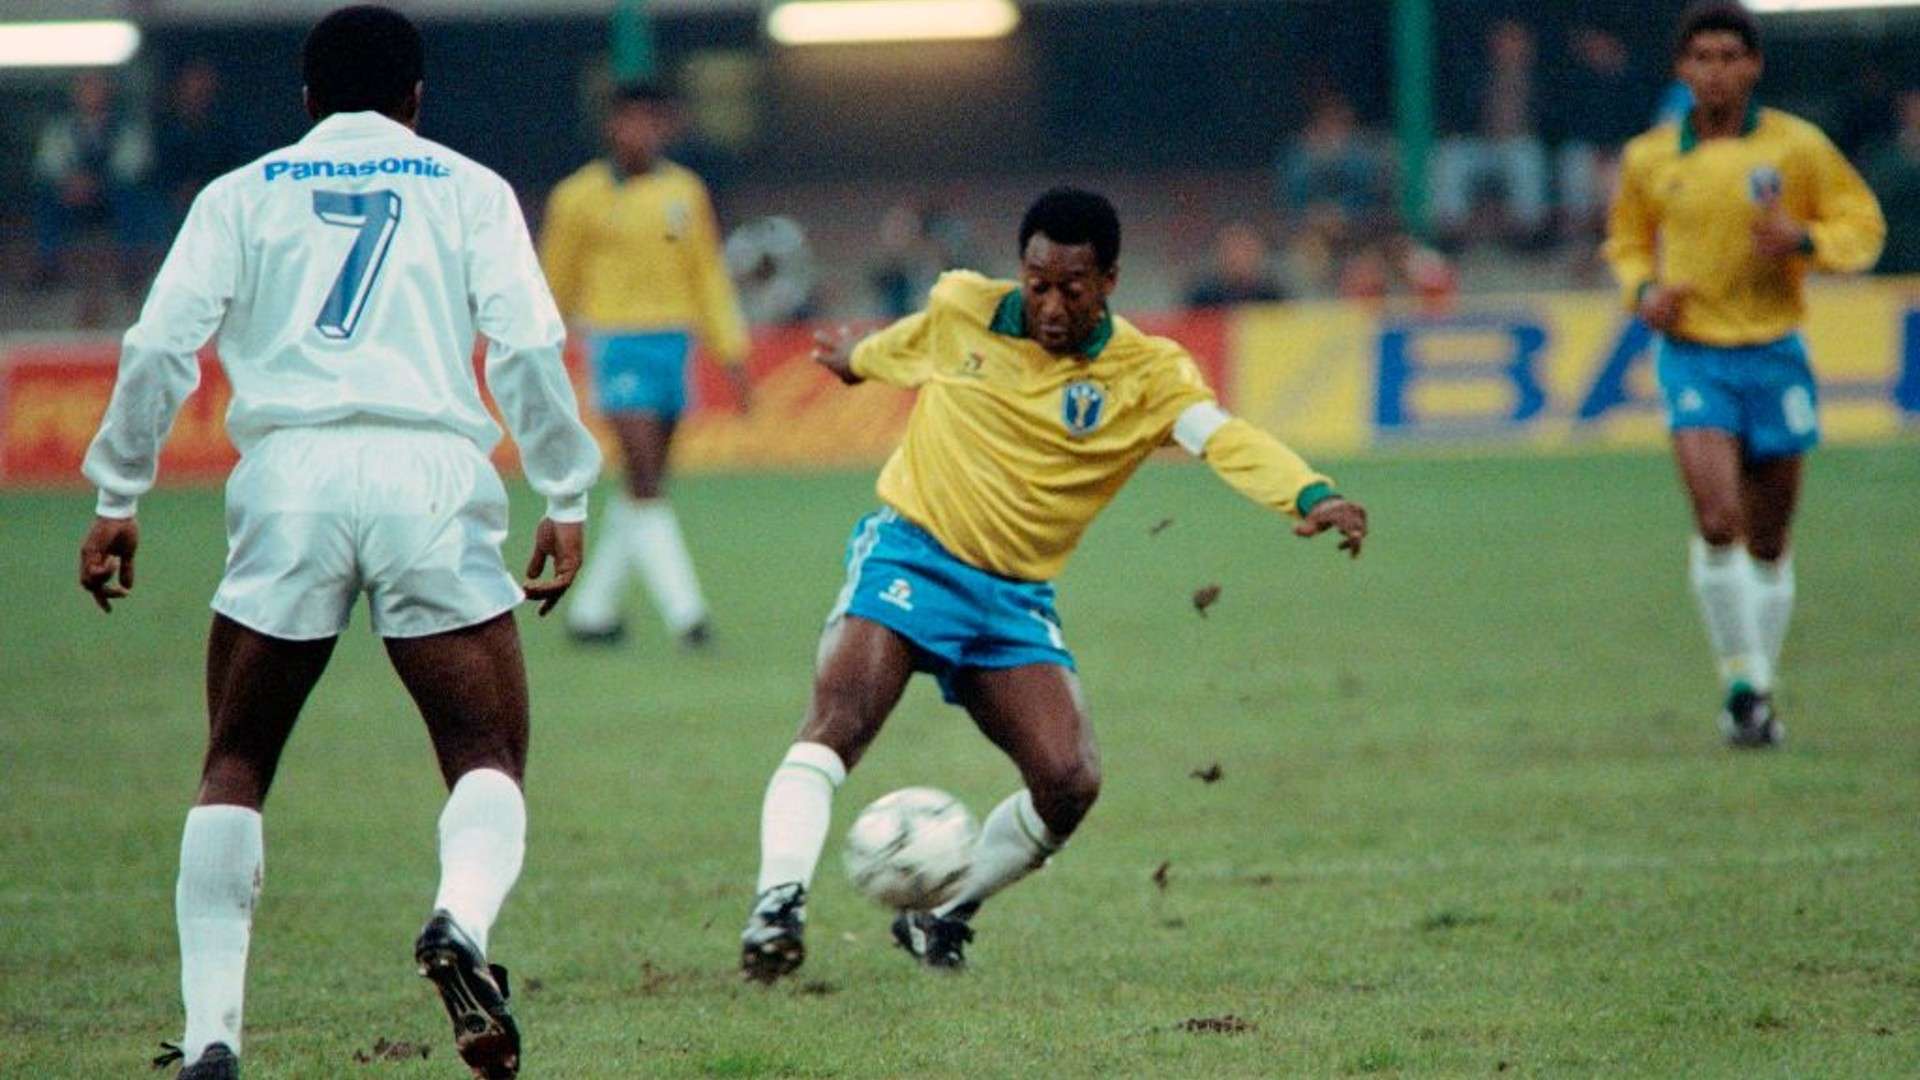 Pele in action.